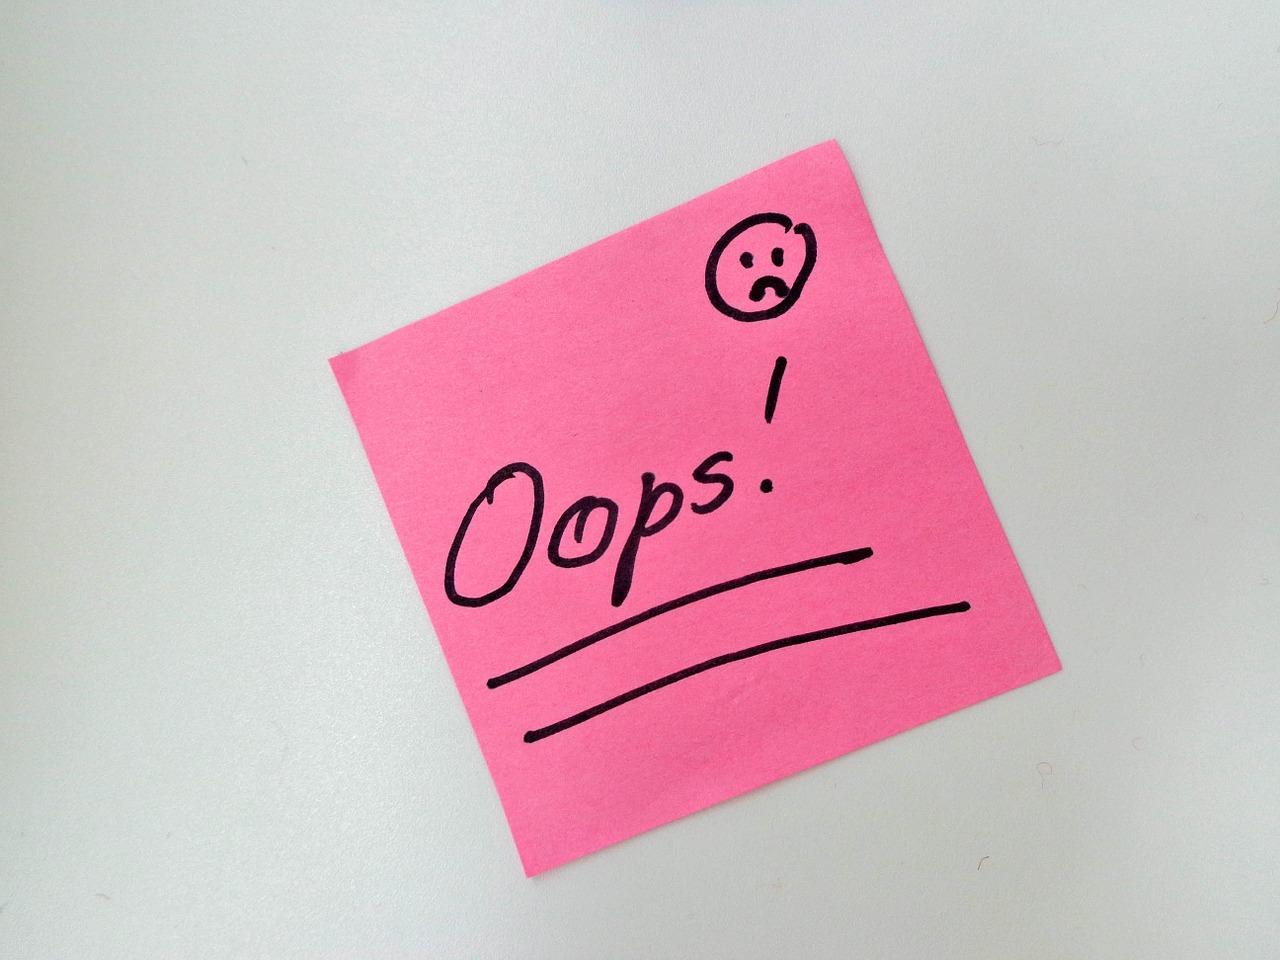 Oops Surprise Sticky Note Pink  - jessica45 / Pixabay